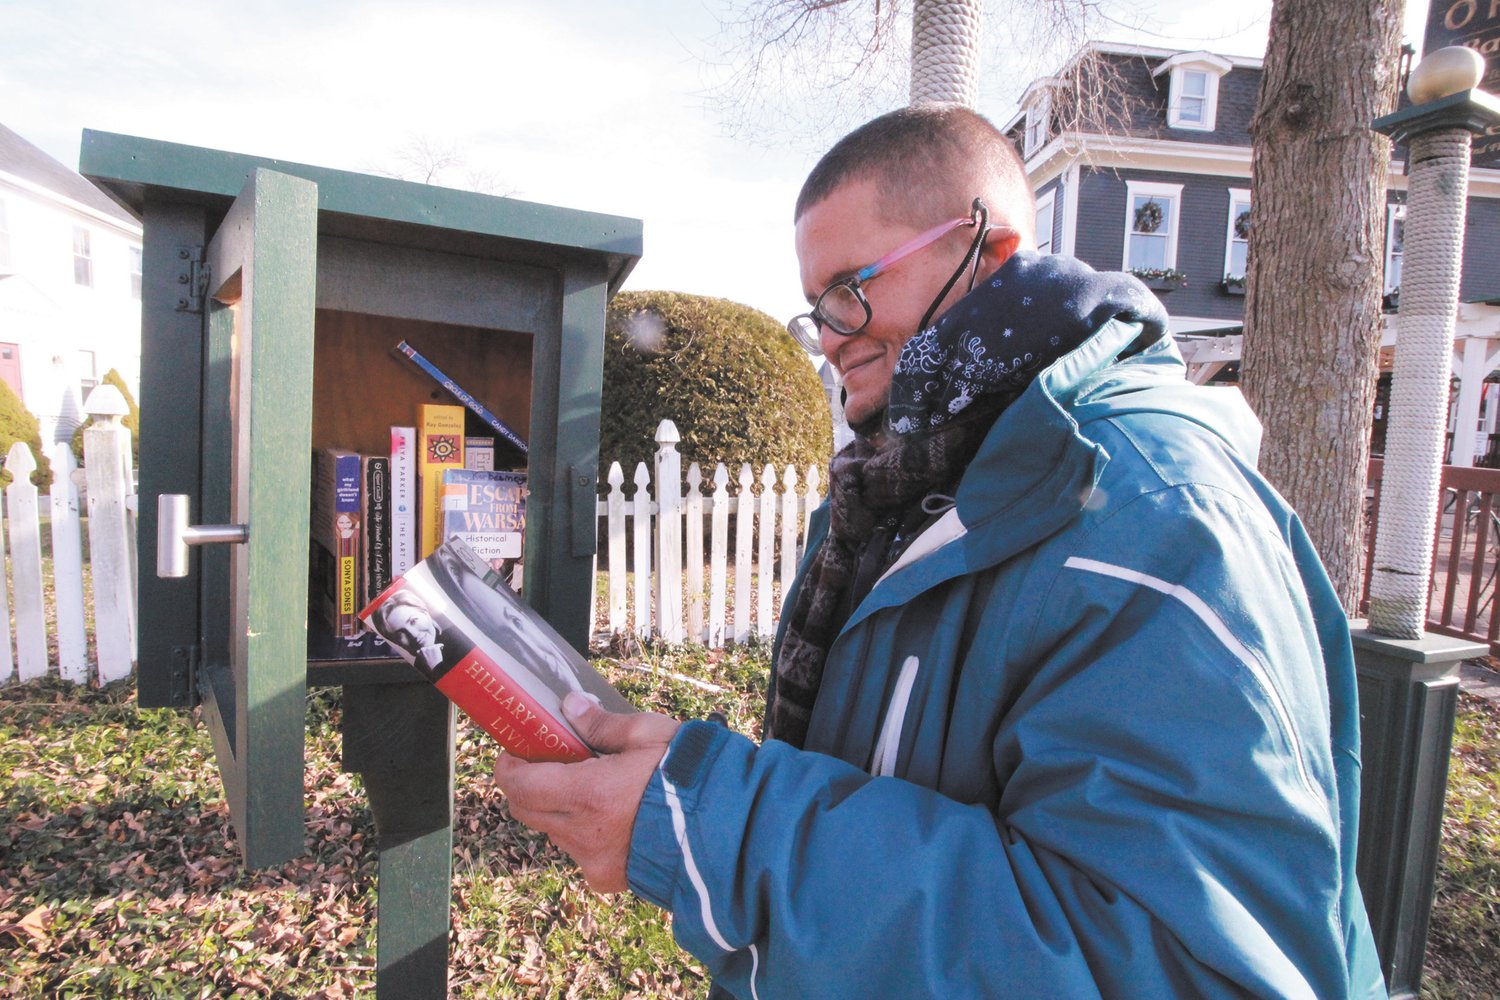 ON HIS READING LIST: Angelo Nieves was delighted to find a book on Hillary Clinton in one of several book exchange box libraries in the village.